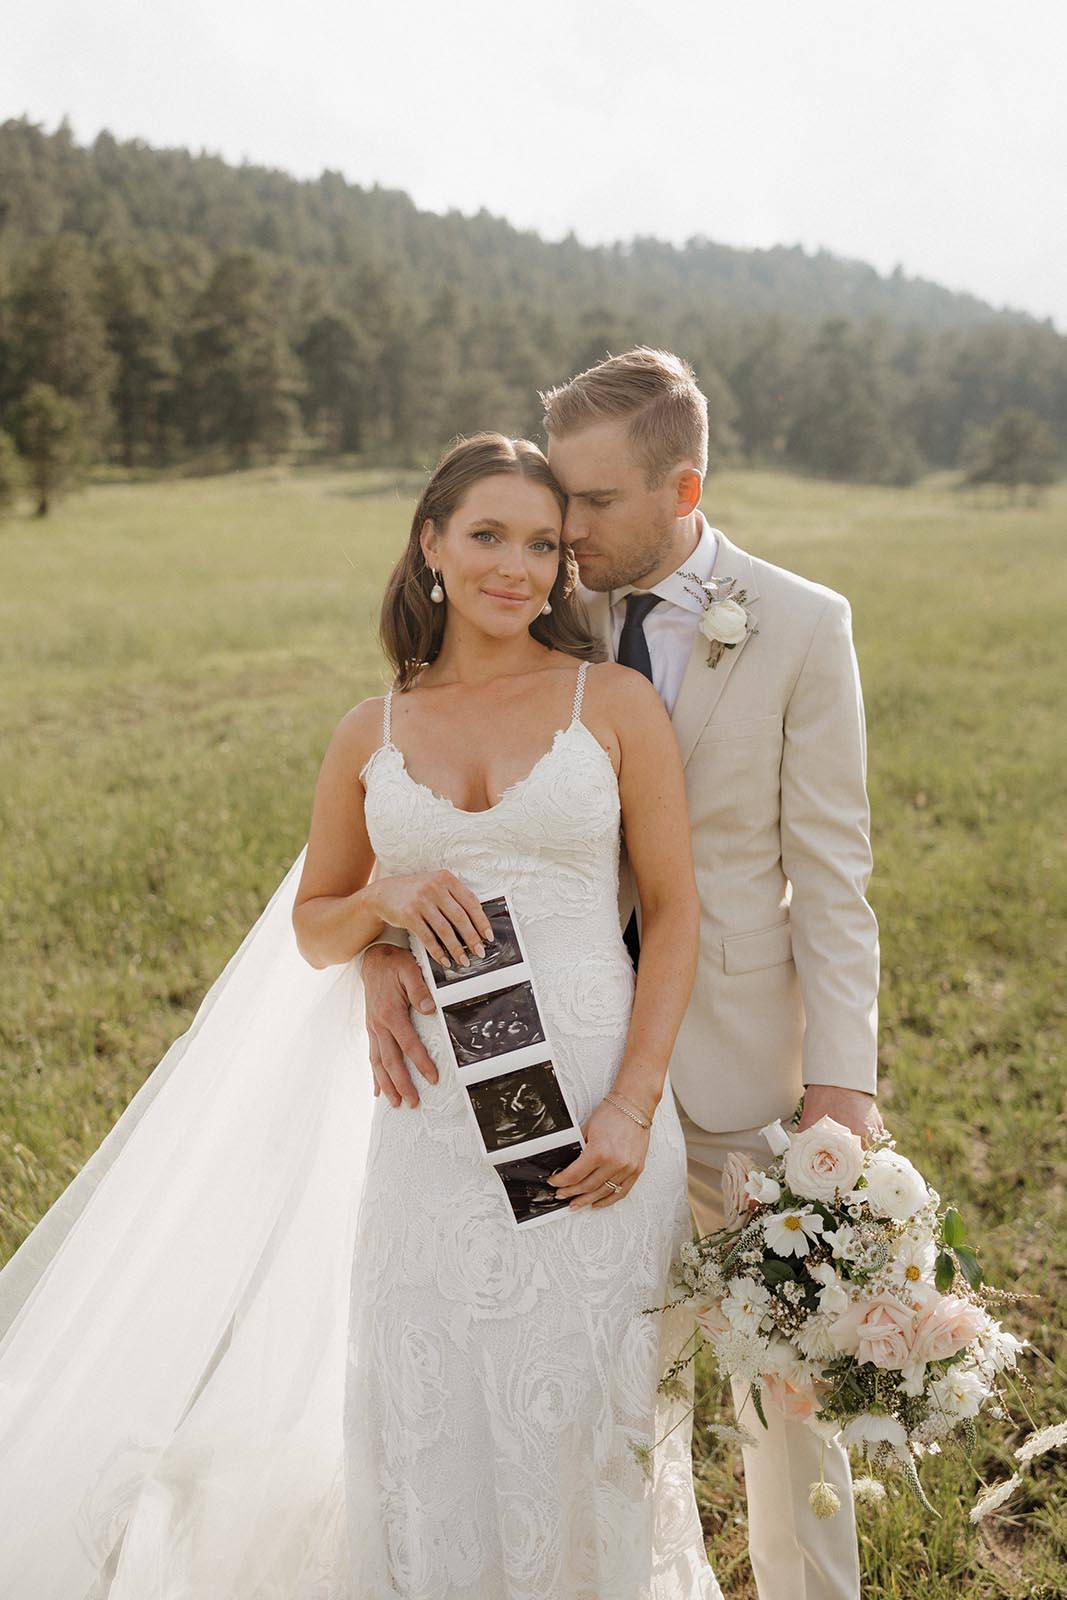 Pregnant bride, hand on belly, smiling and showing us a photograph of her baby bump